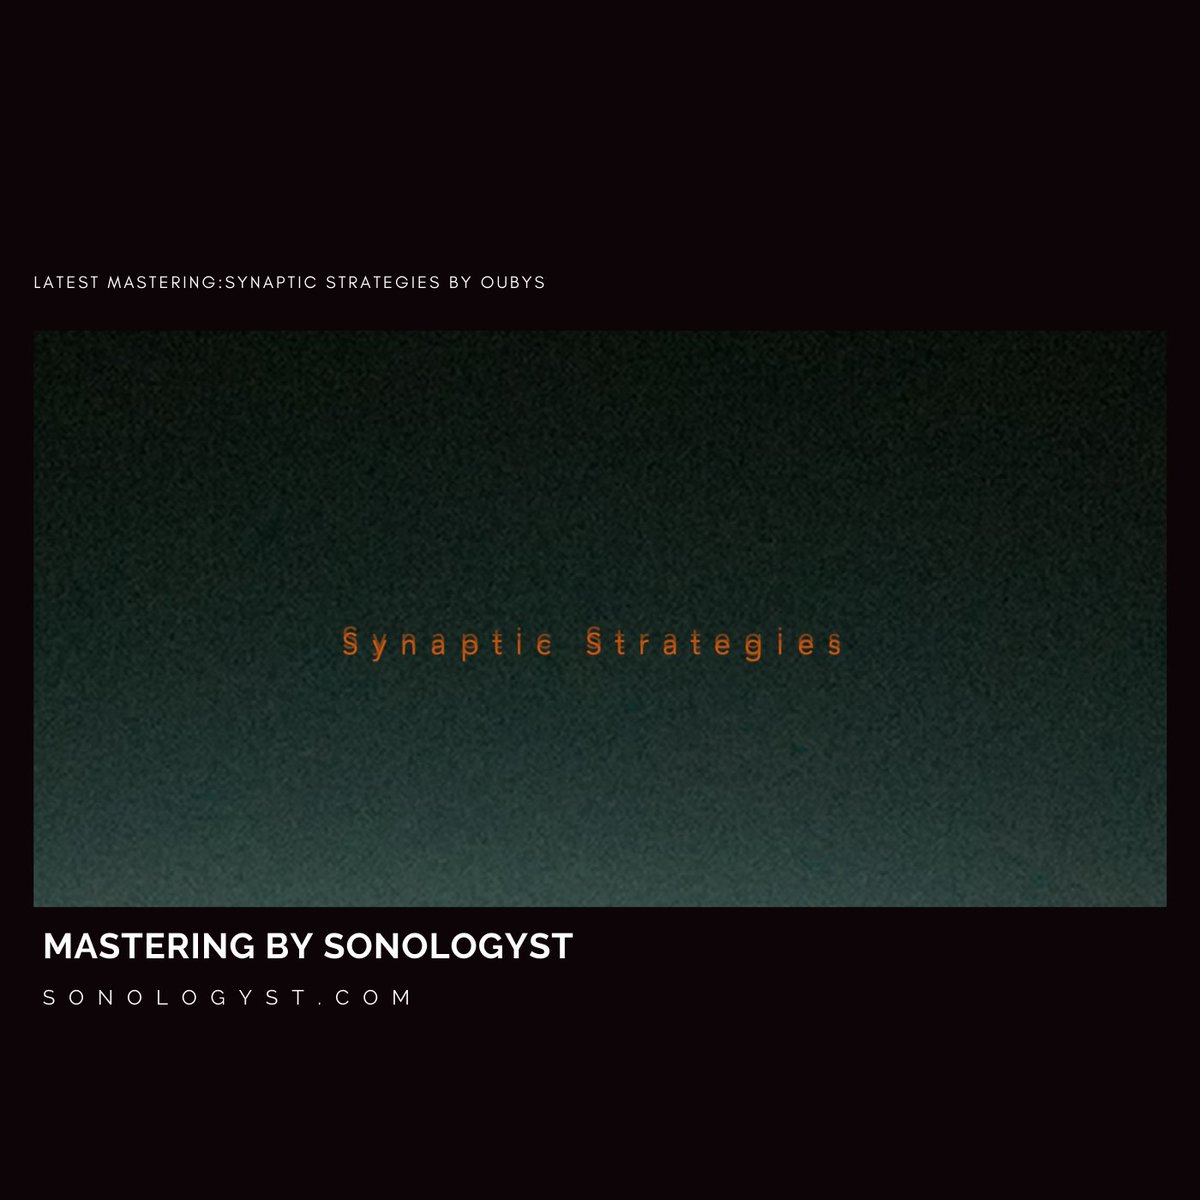 LATEST MASTERING BY SONOLOGYST 'Synaptic Strategies' by Oubys For the occasion Eighth Tower Magazine offers to the Eighth Tower patrons a limited series of free dl codes to download the album in preview (official date release is May the 10th): patreon.com/posts/synaptic…